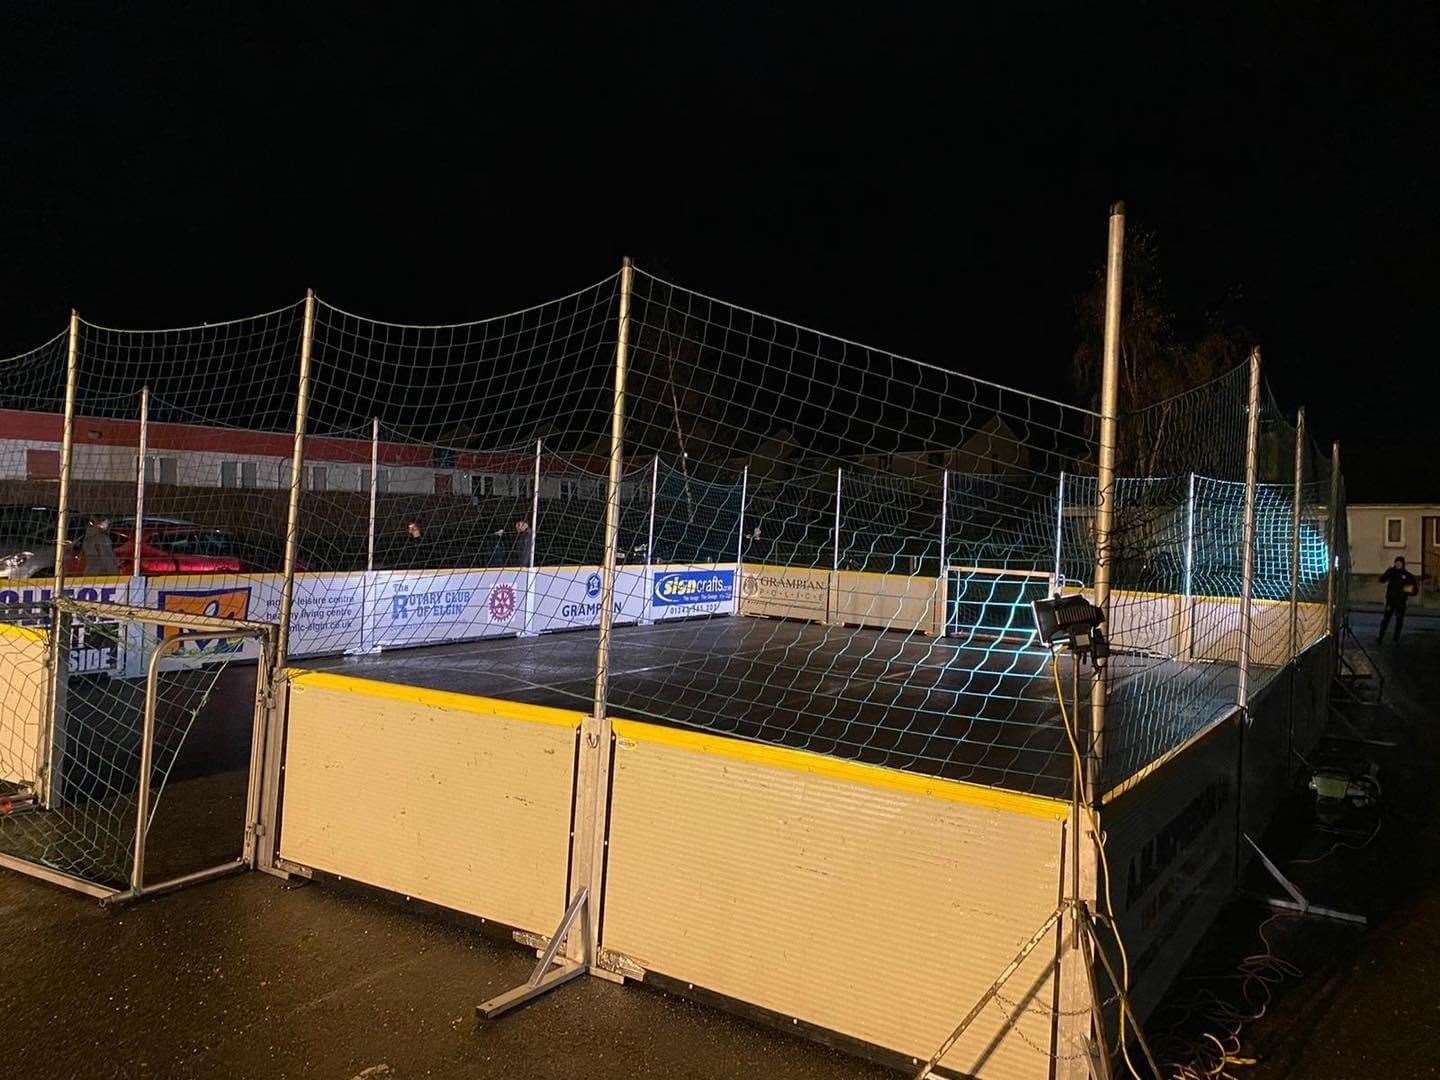 The street sports 'cage'.